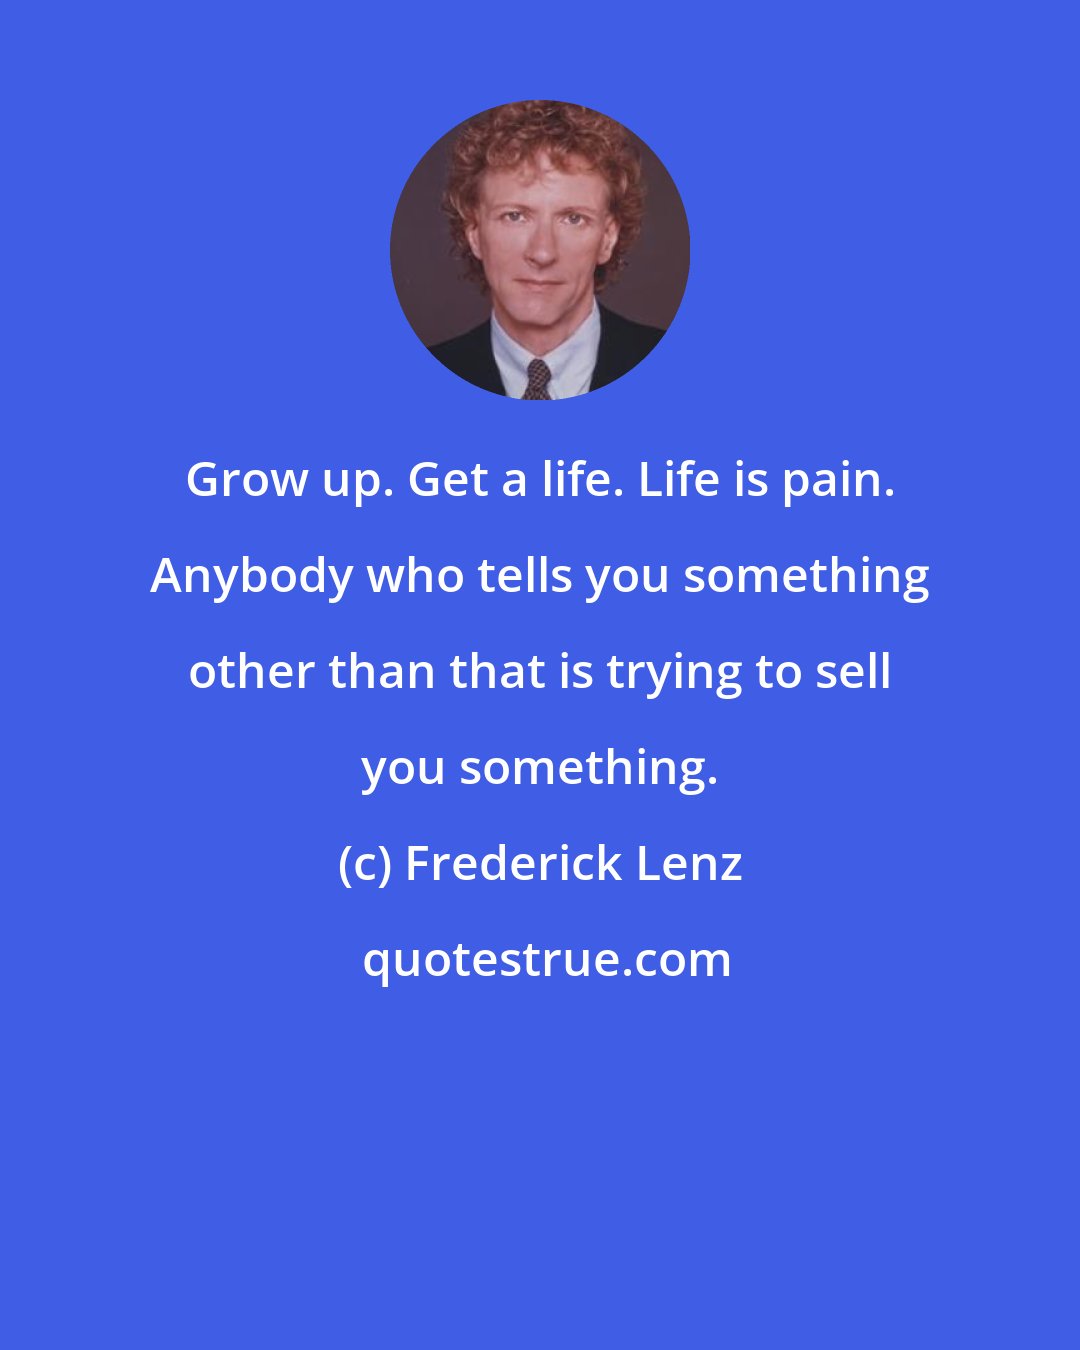 Frederick Lenz: Grow up. Get a life. Life is pain. Anybody who tells you something other than that is trying to sell you something.